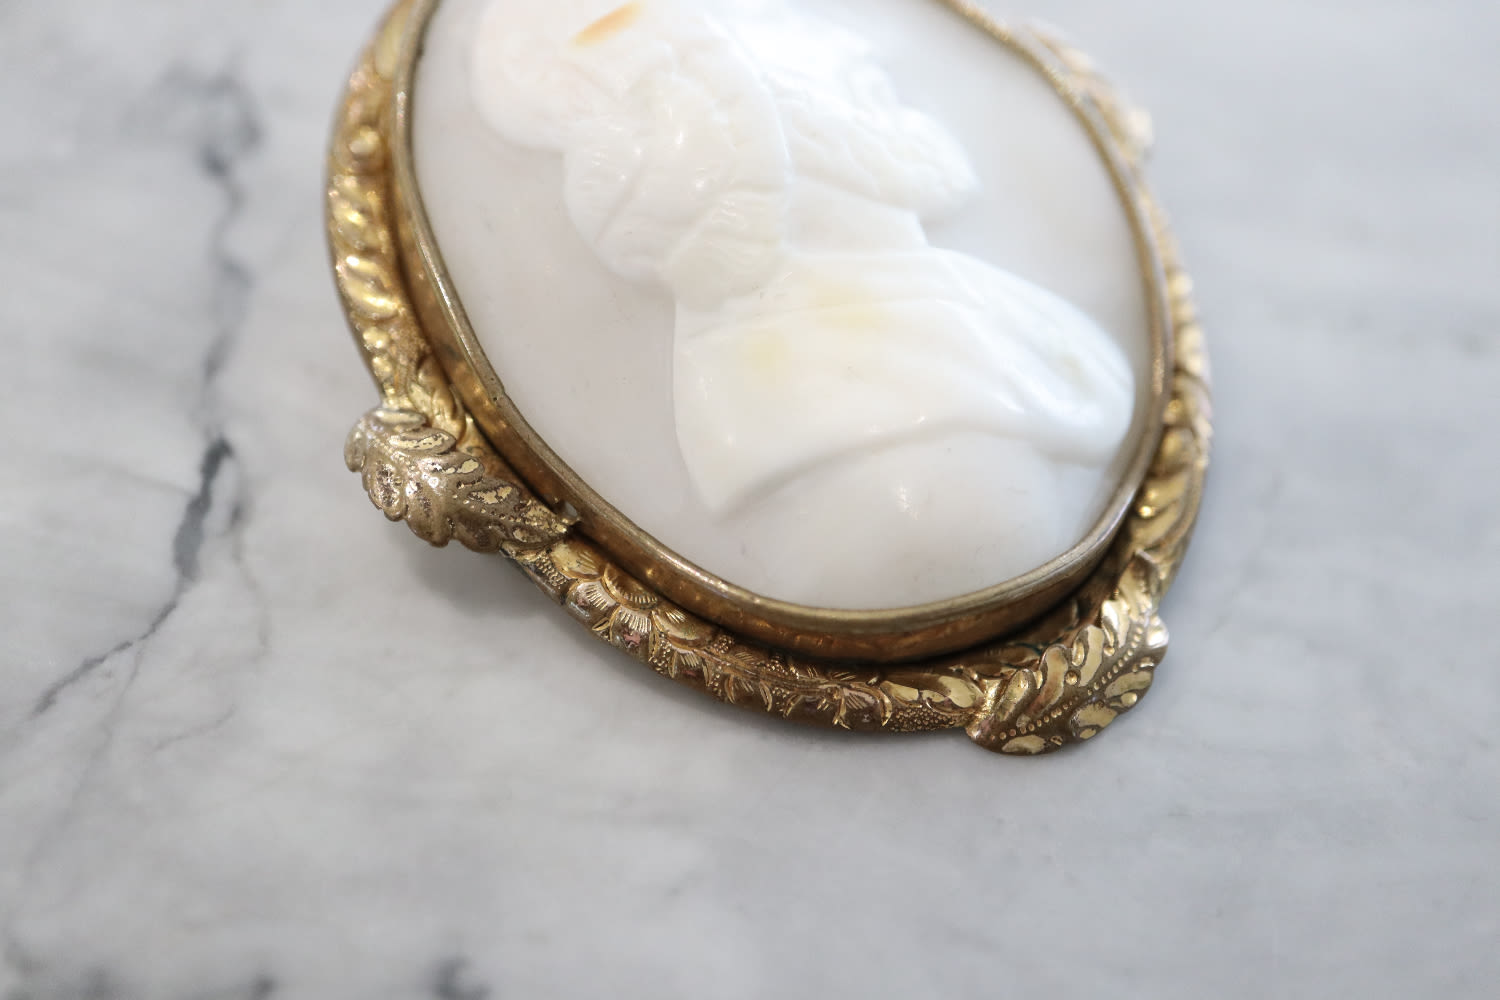 WHITE STONE CAMEO BROOCH in YELLOW METAL - Image 3 of 6